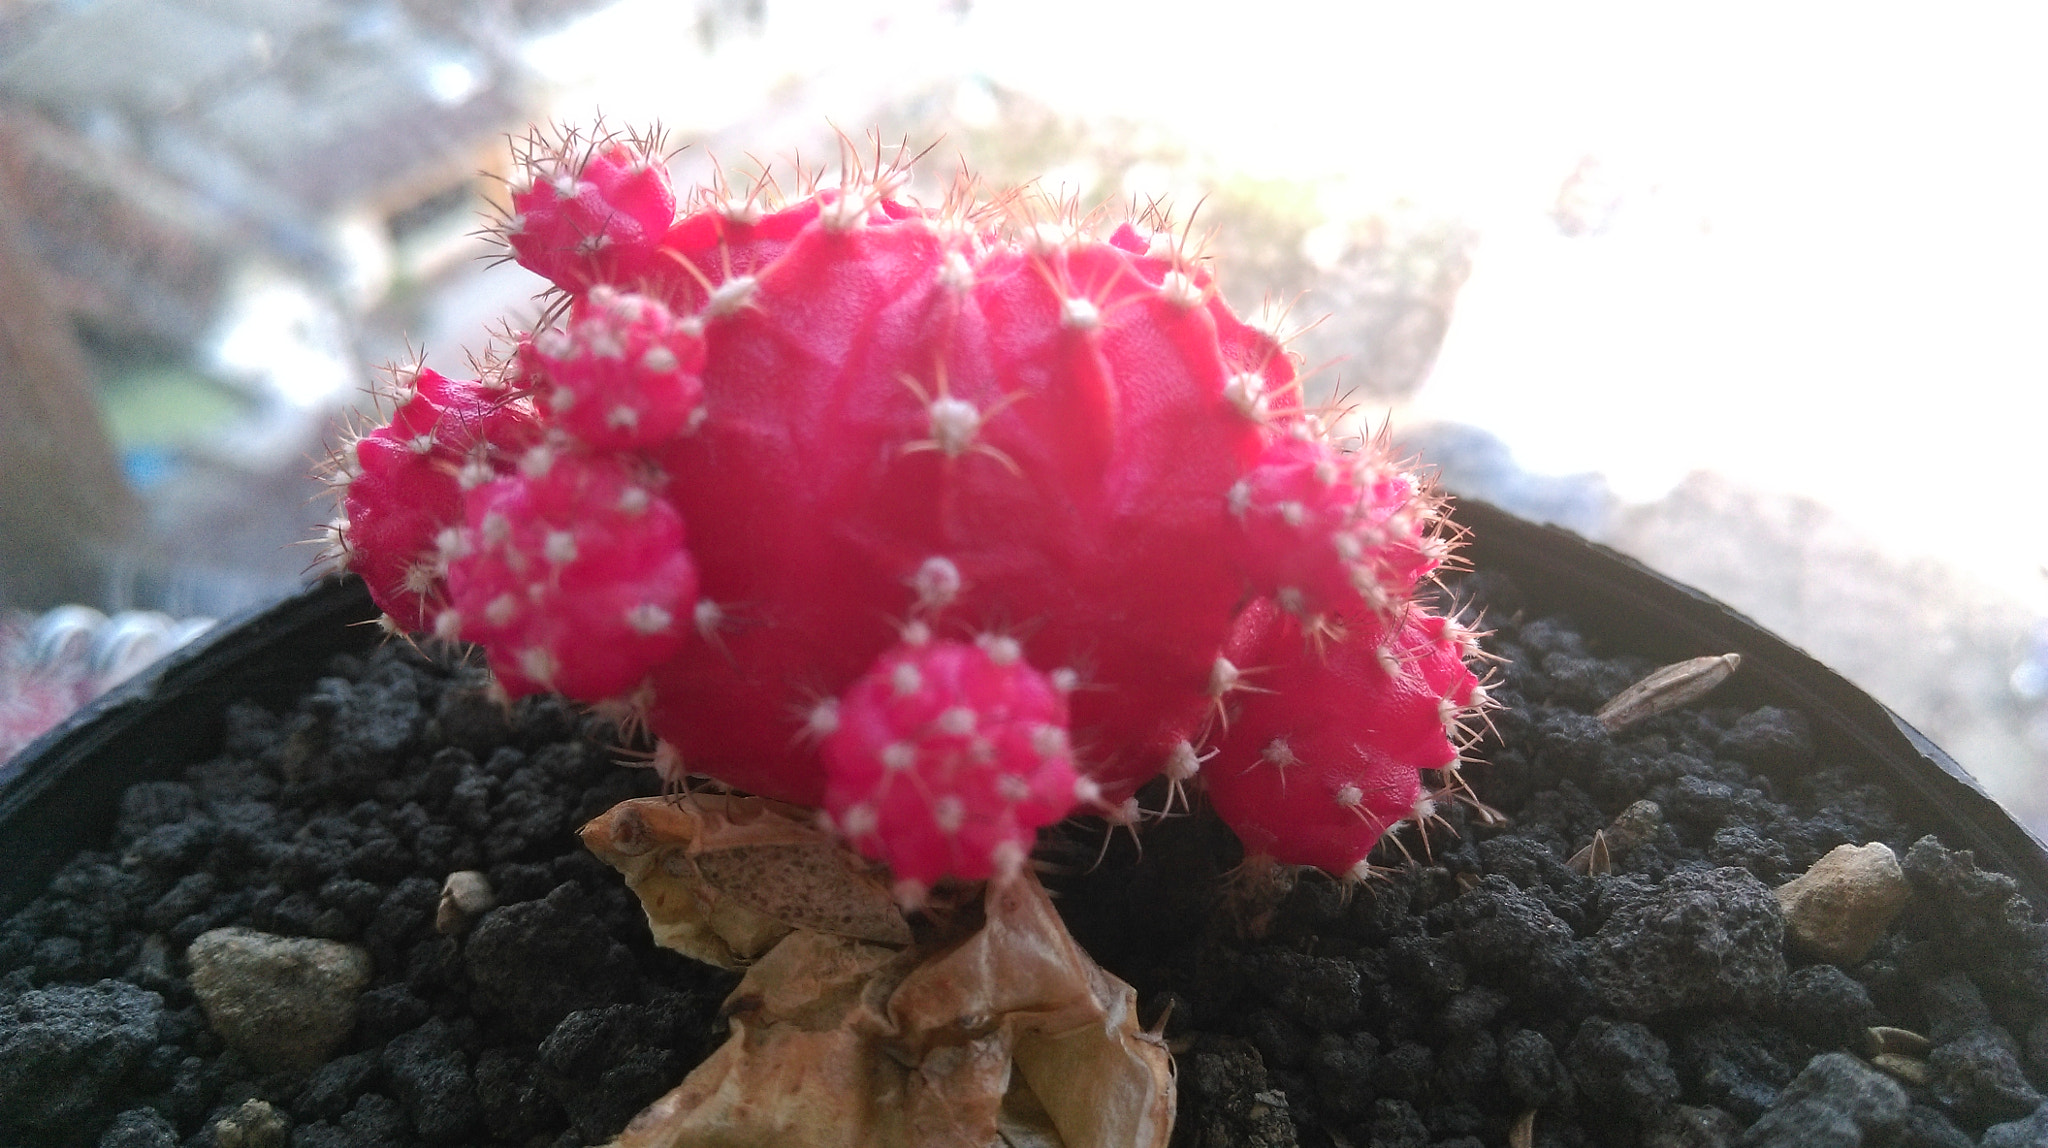 HTC DESIRE 826 DUAL SIM sample photo. Dying red ruby cactus photography